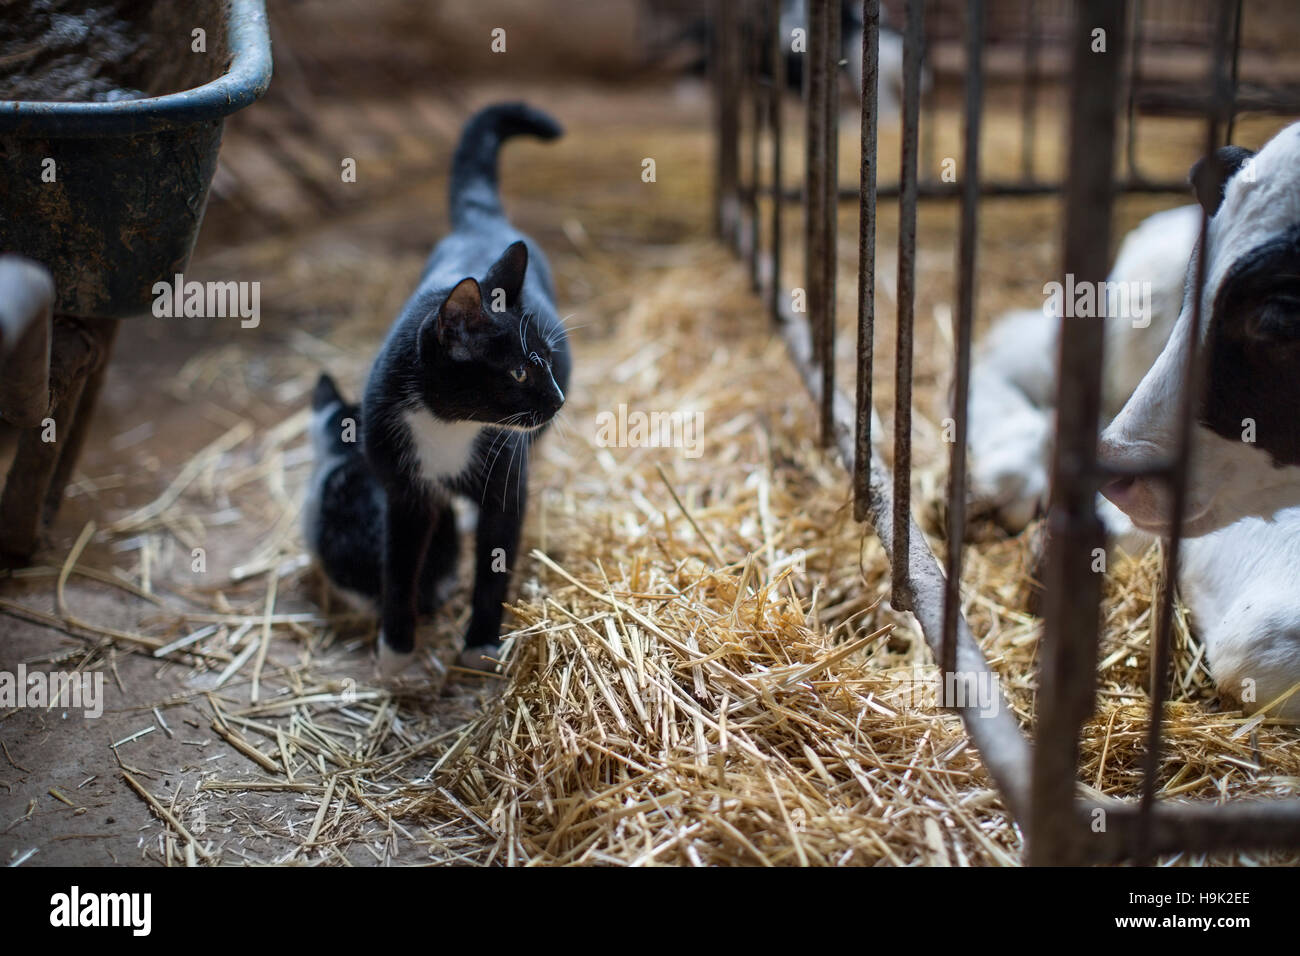 Cats and calf on farm Stock Photo